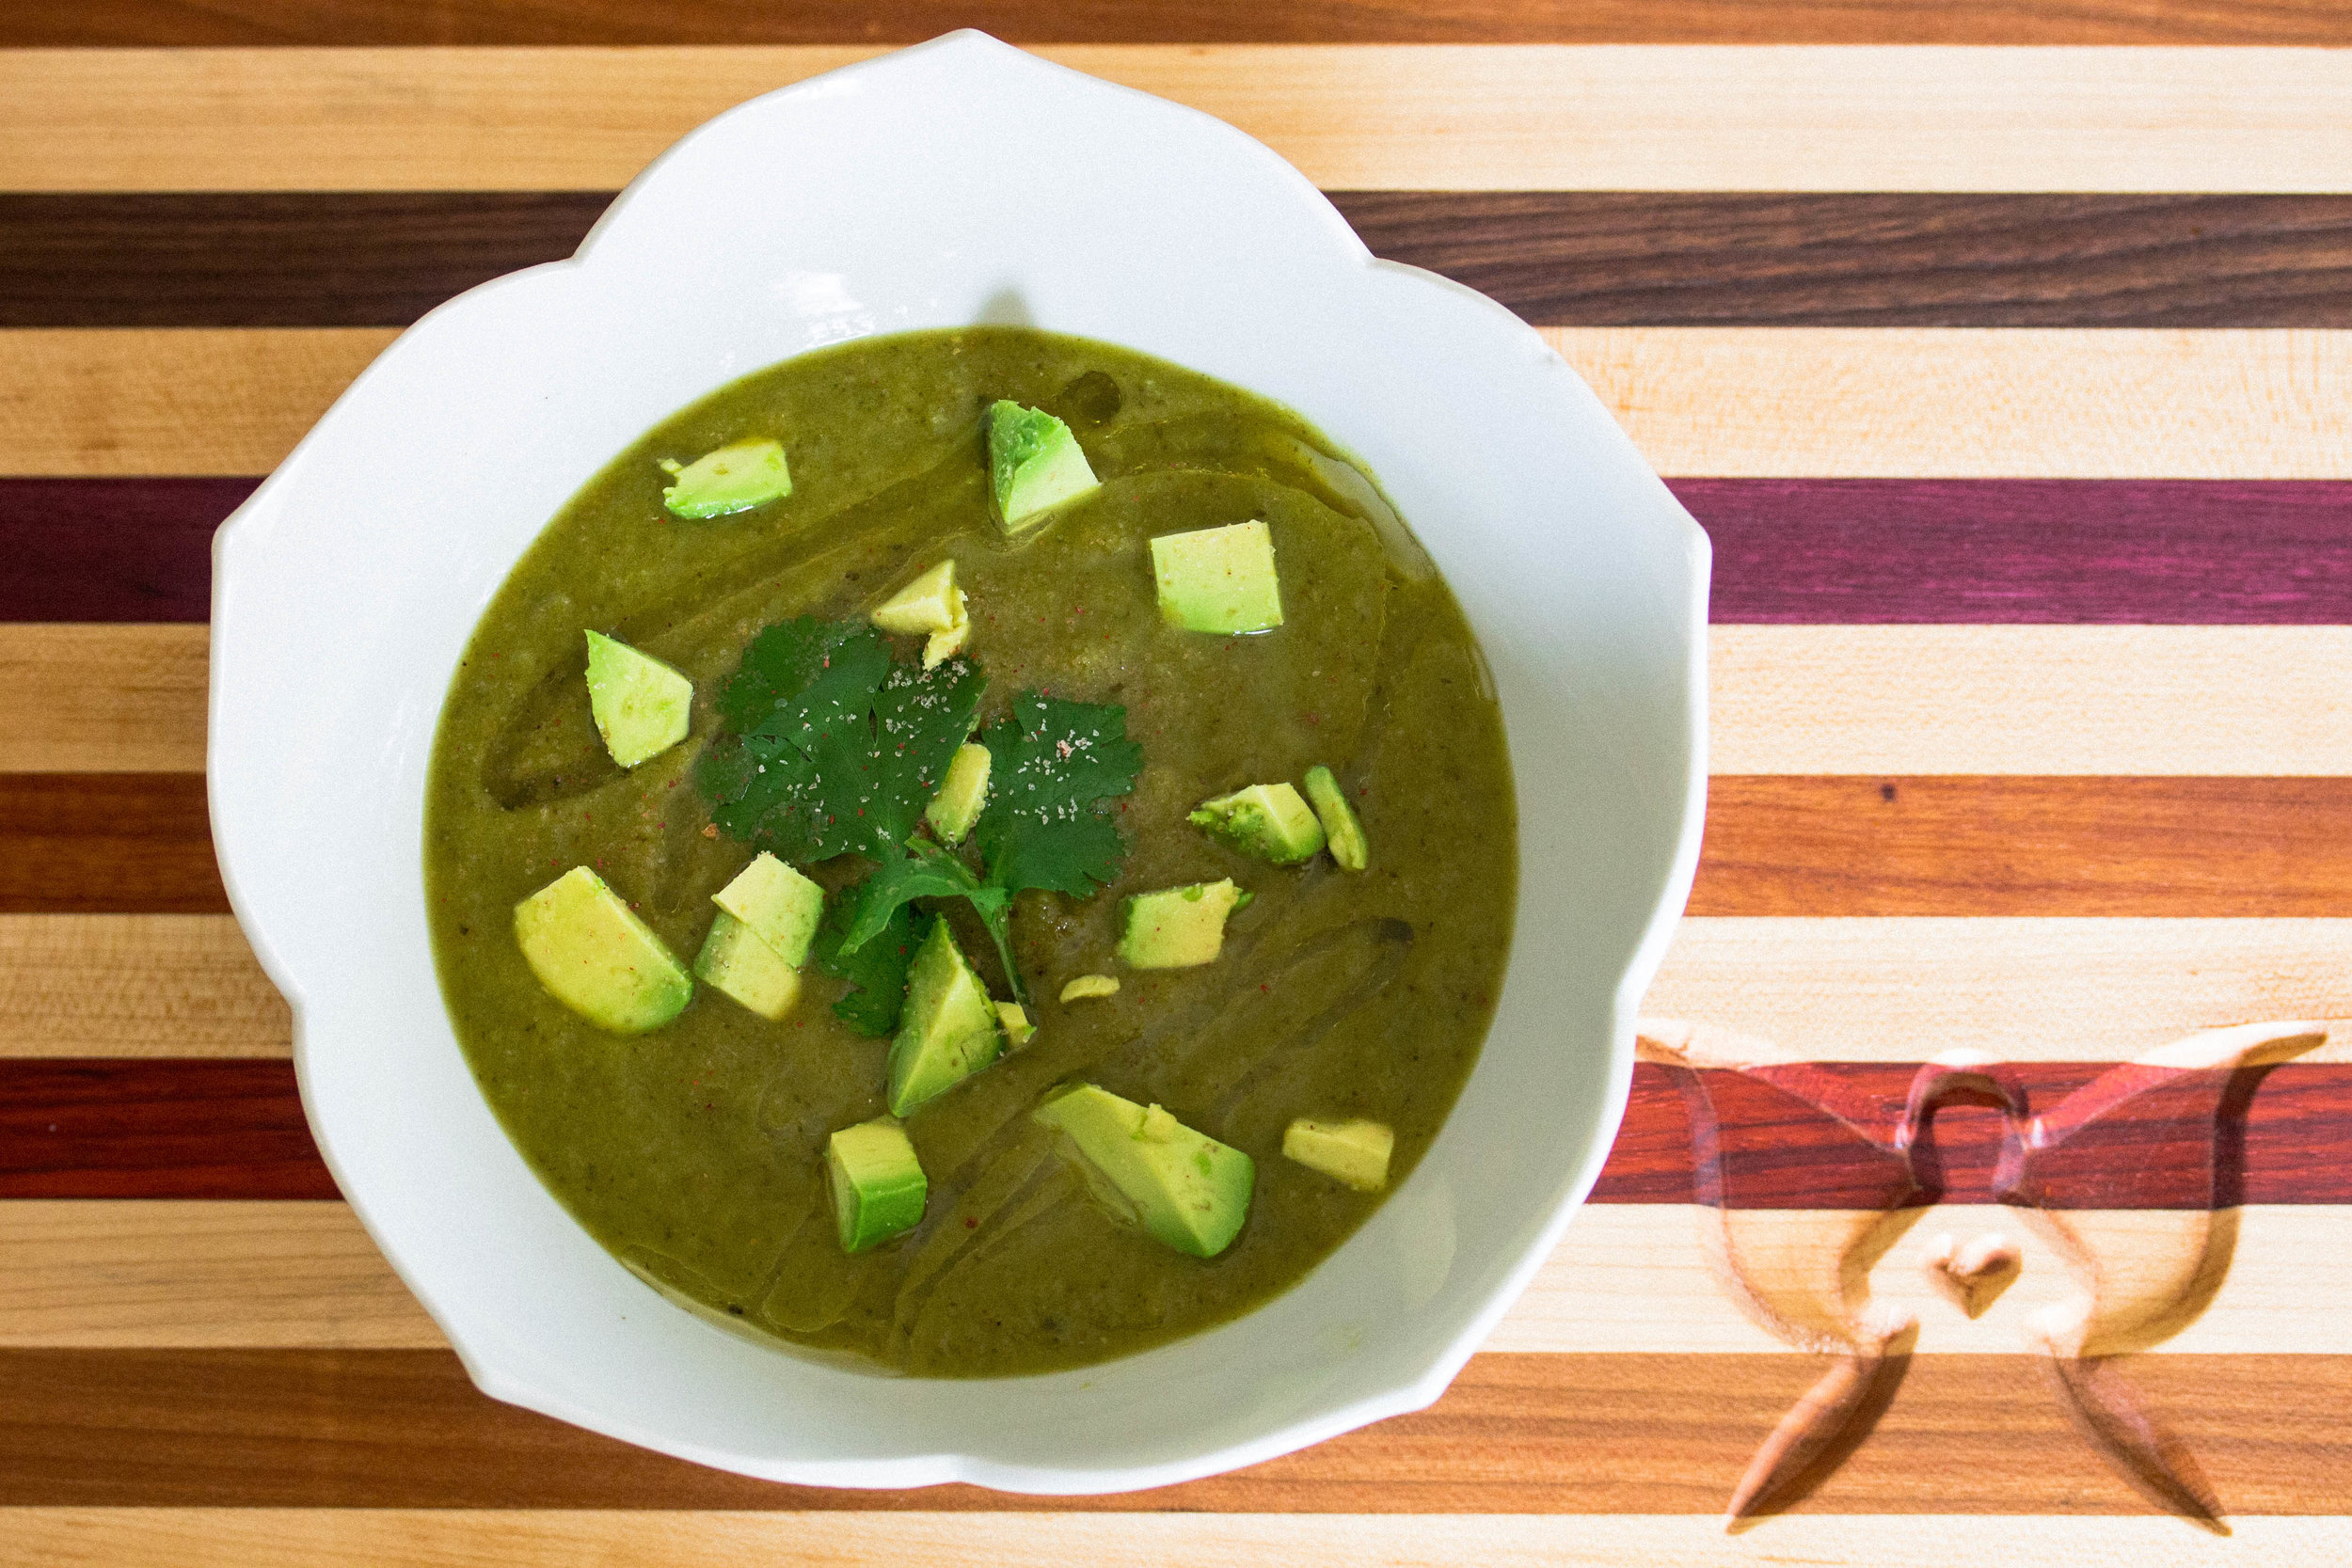 Pure soup and serve garnished with avocado and cilantro.